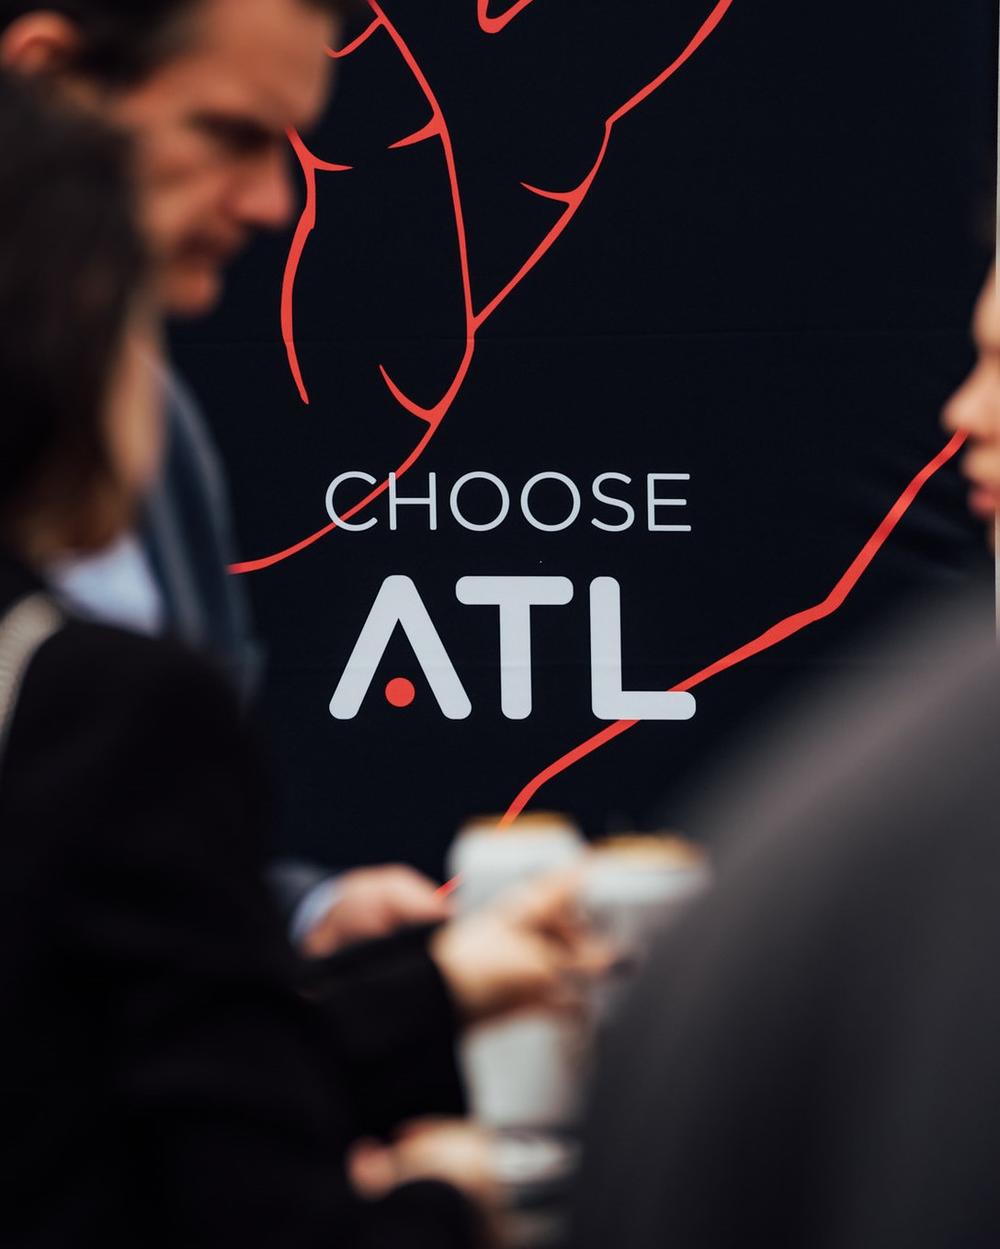 The Chamber launched the ChooseATL initiative in 2015 to attract next-gen talent.